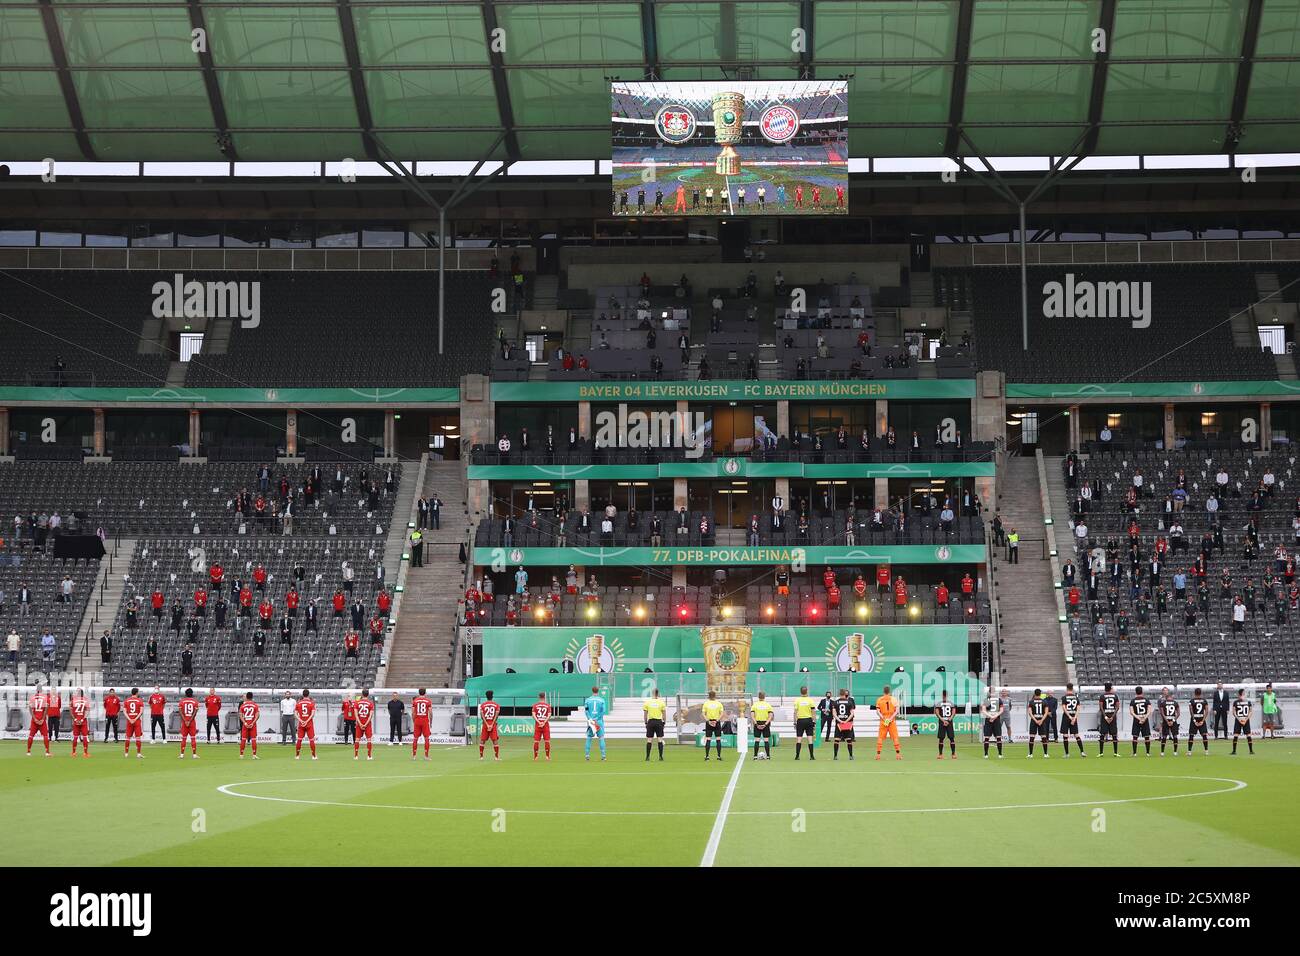 Berlin, Germany, 4 th July 2020,  the teams in minute's silence for the corona virus victims at the DFB Pokal Final match  FC BAYERN MUENCHEN - BAYER 04 LEVERKUSEN 4-2  in season 2019/2020 , FCB © Peter Schatz / Alamy Live News / Jürgen Fromme/firosportphoto/Pool   - DFB REGULATIONS PROHIBIT ANY USE OF PHOTOGRAPHS as IMAGE SEQUENCES and/or QUASI-VIDEO -  National and international News-Agencies OUT Editorial Use ONLY Stock Photo